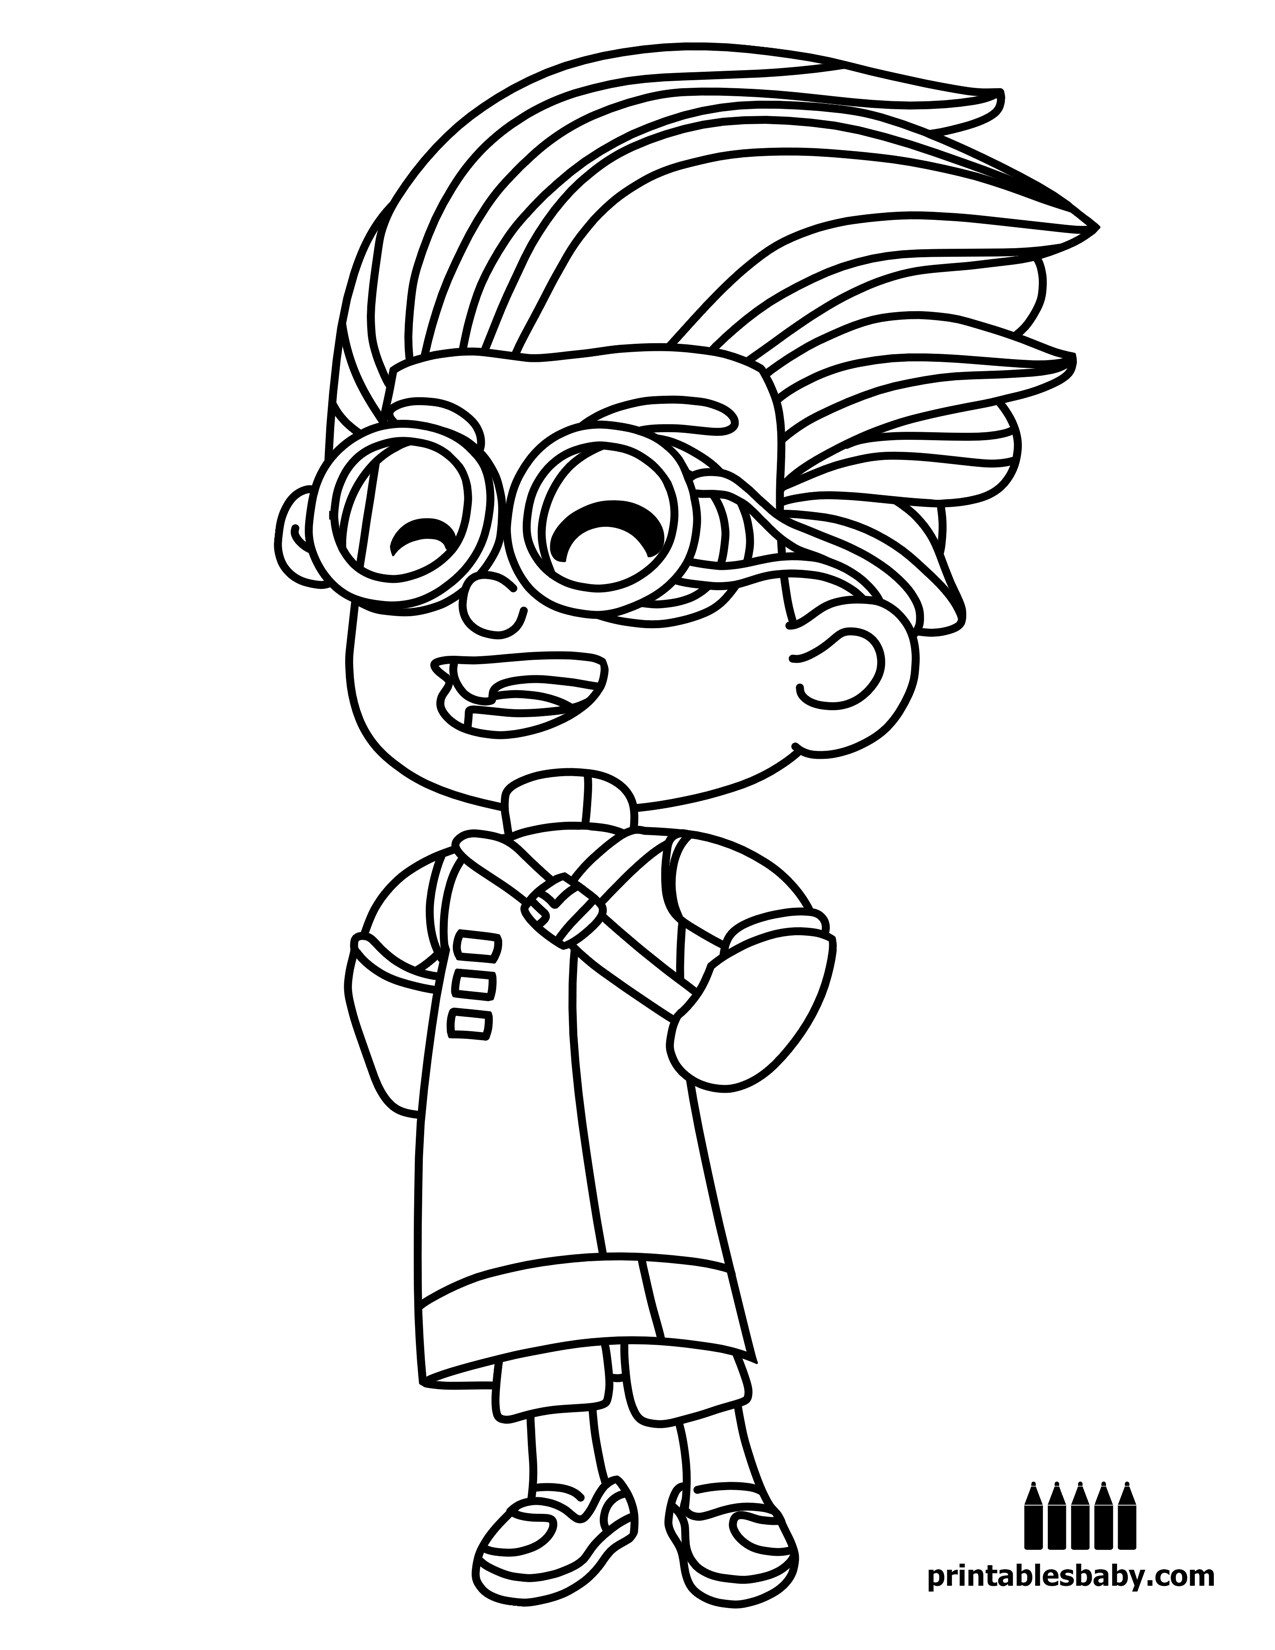 Pj Mask Coloring Pages at GetDrawings | Free download